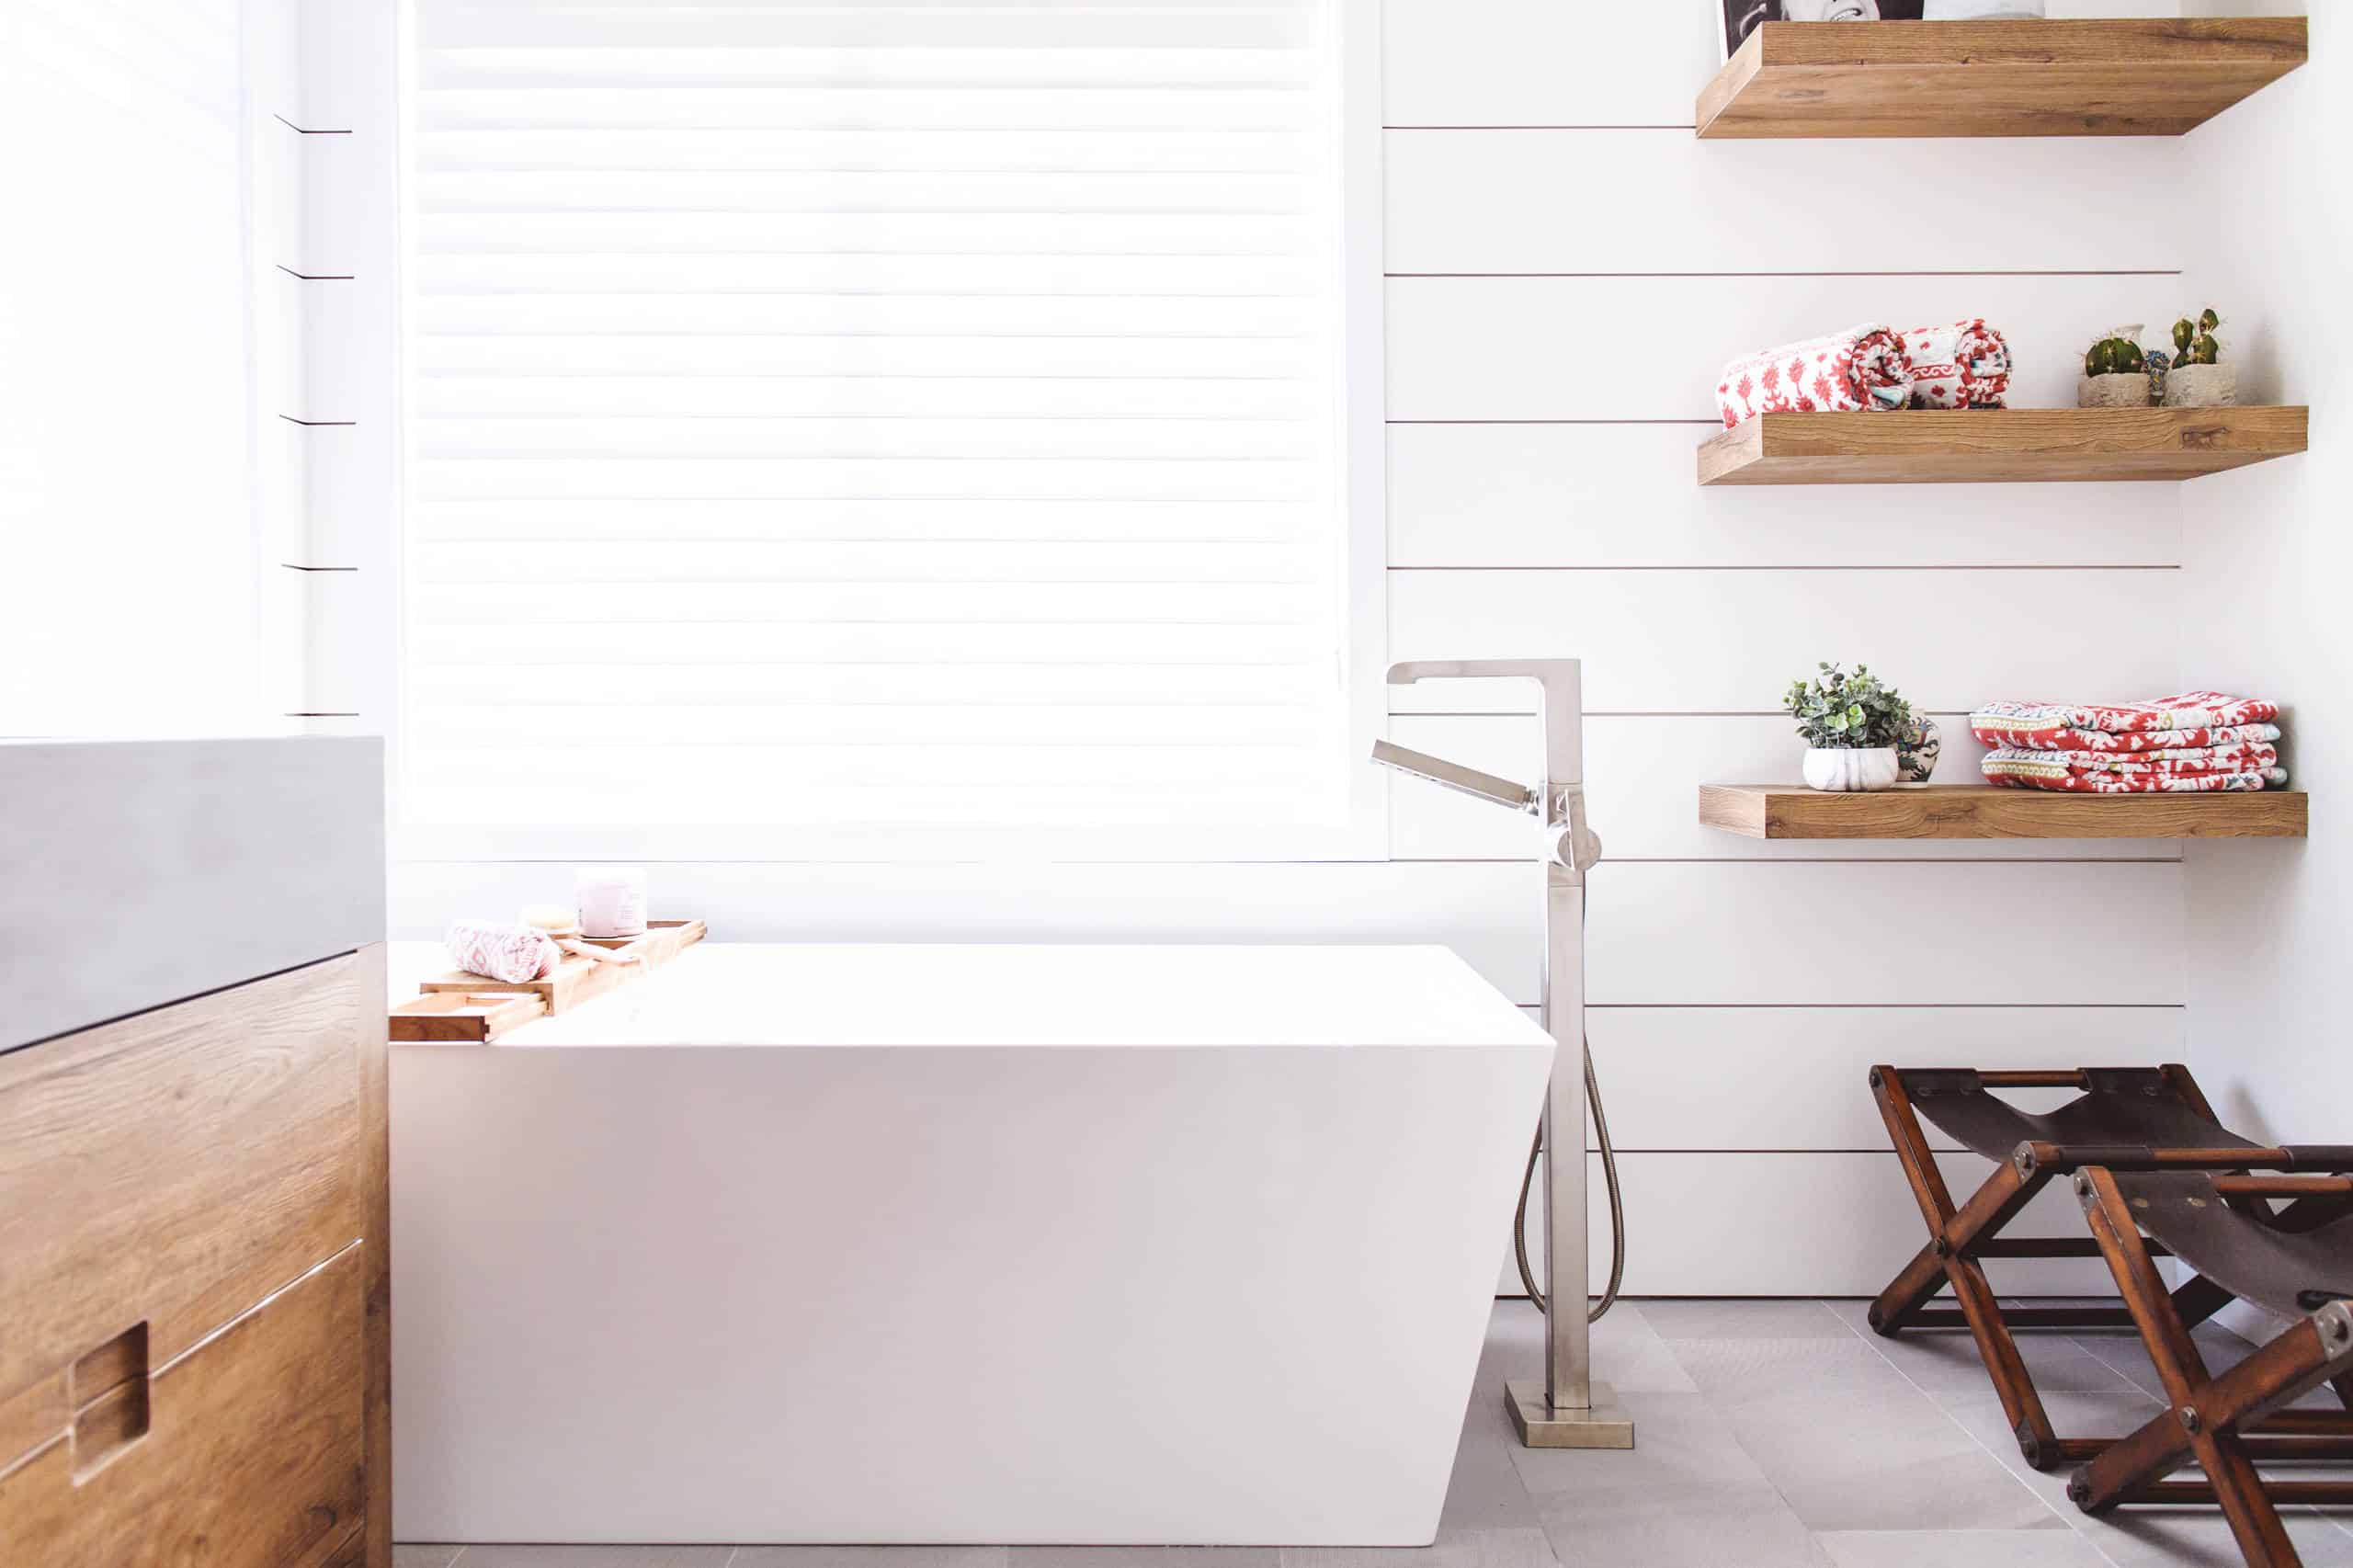 Smart bathroom shelving ideas to make your space feel larger